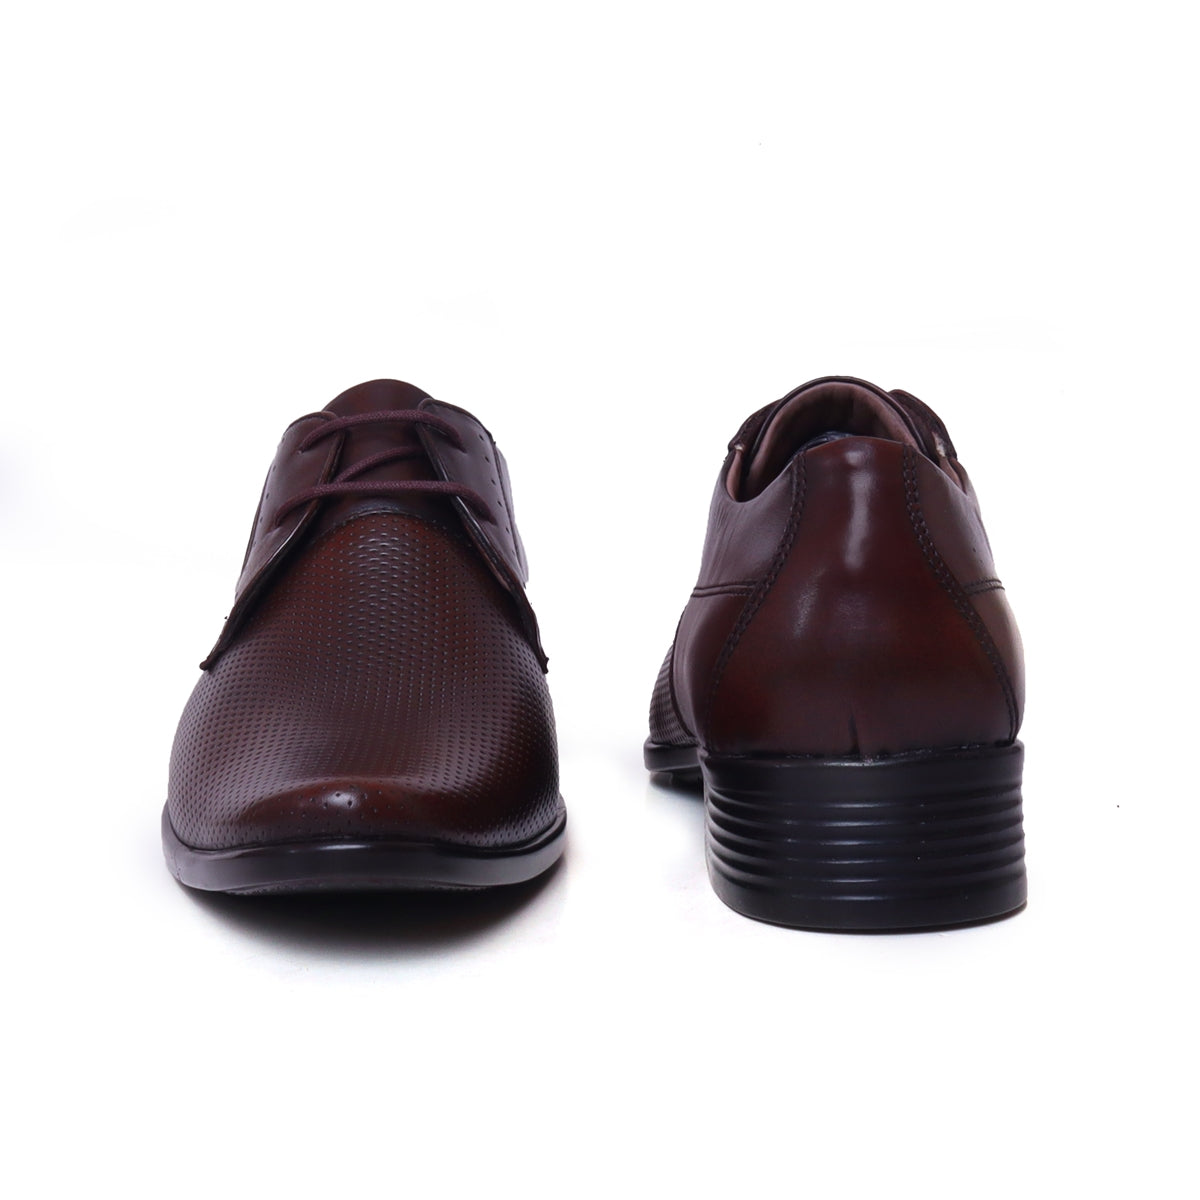 formal leather shoes for men_ZS7